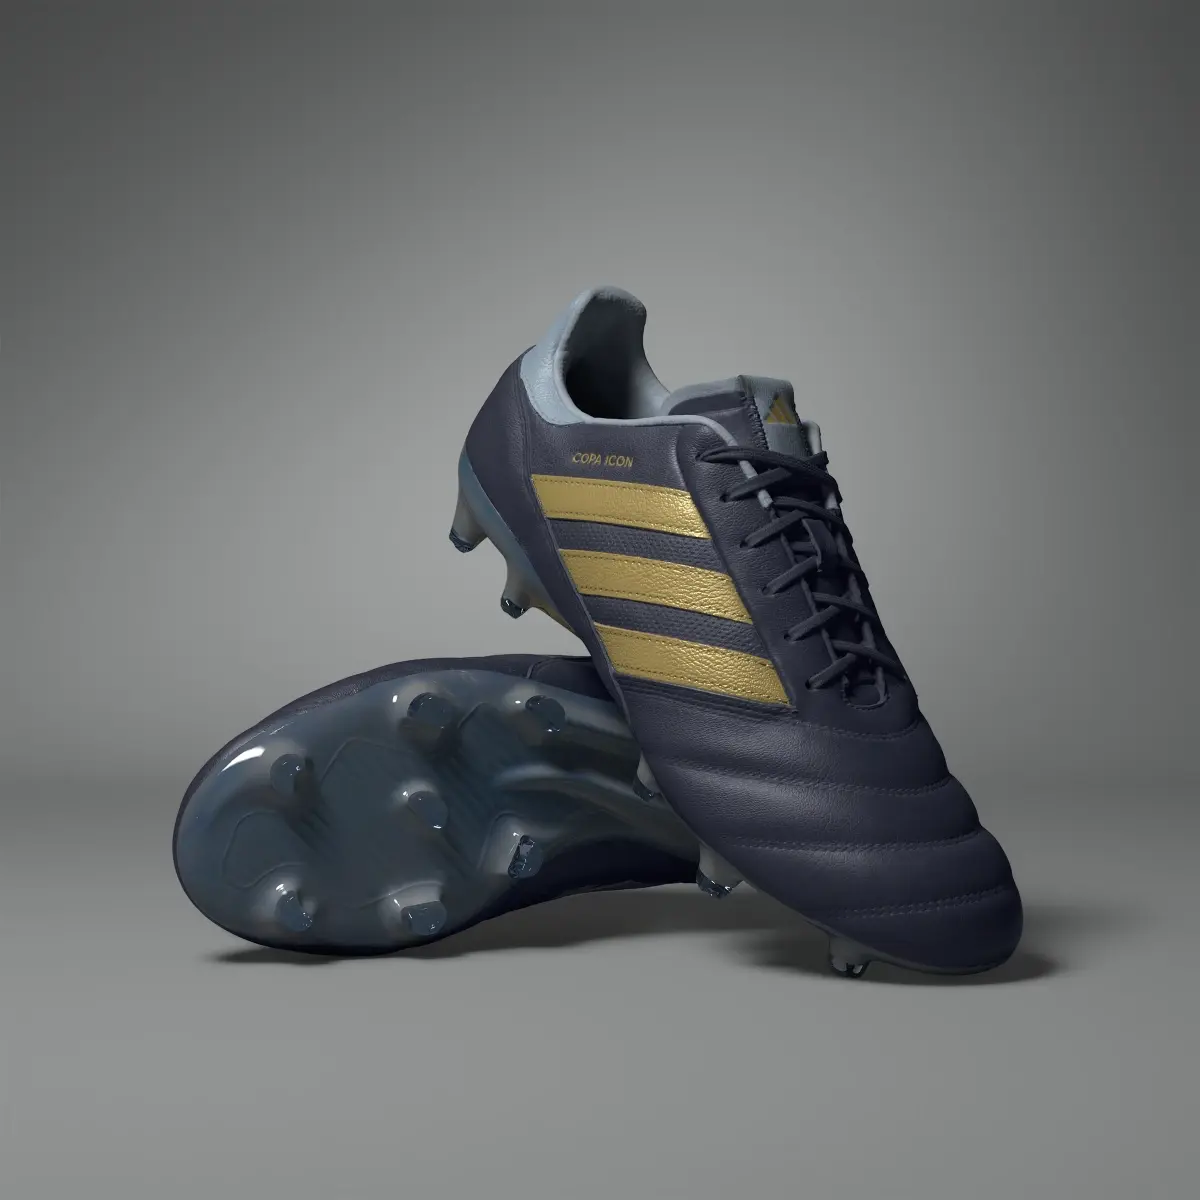 Adidas Copa Icon Firm Ground Soccer Cleats. 1